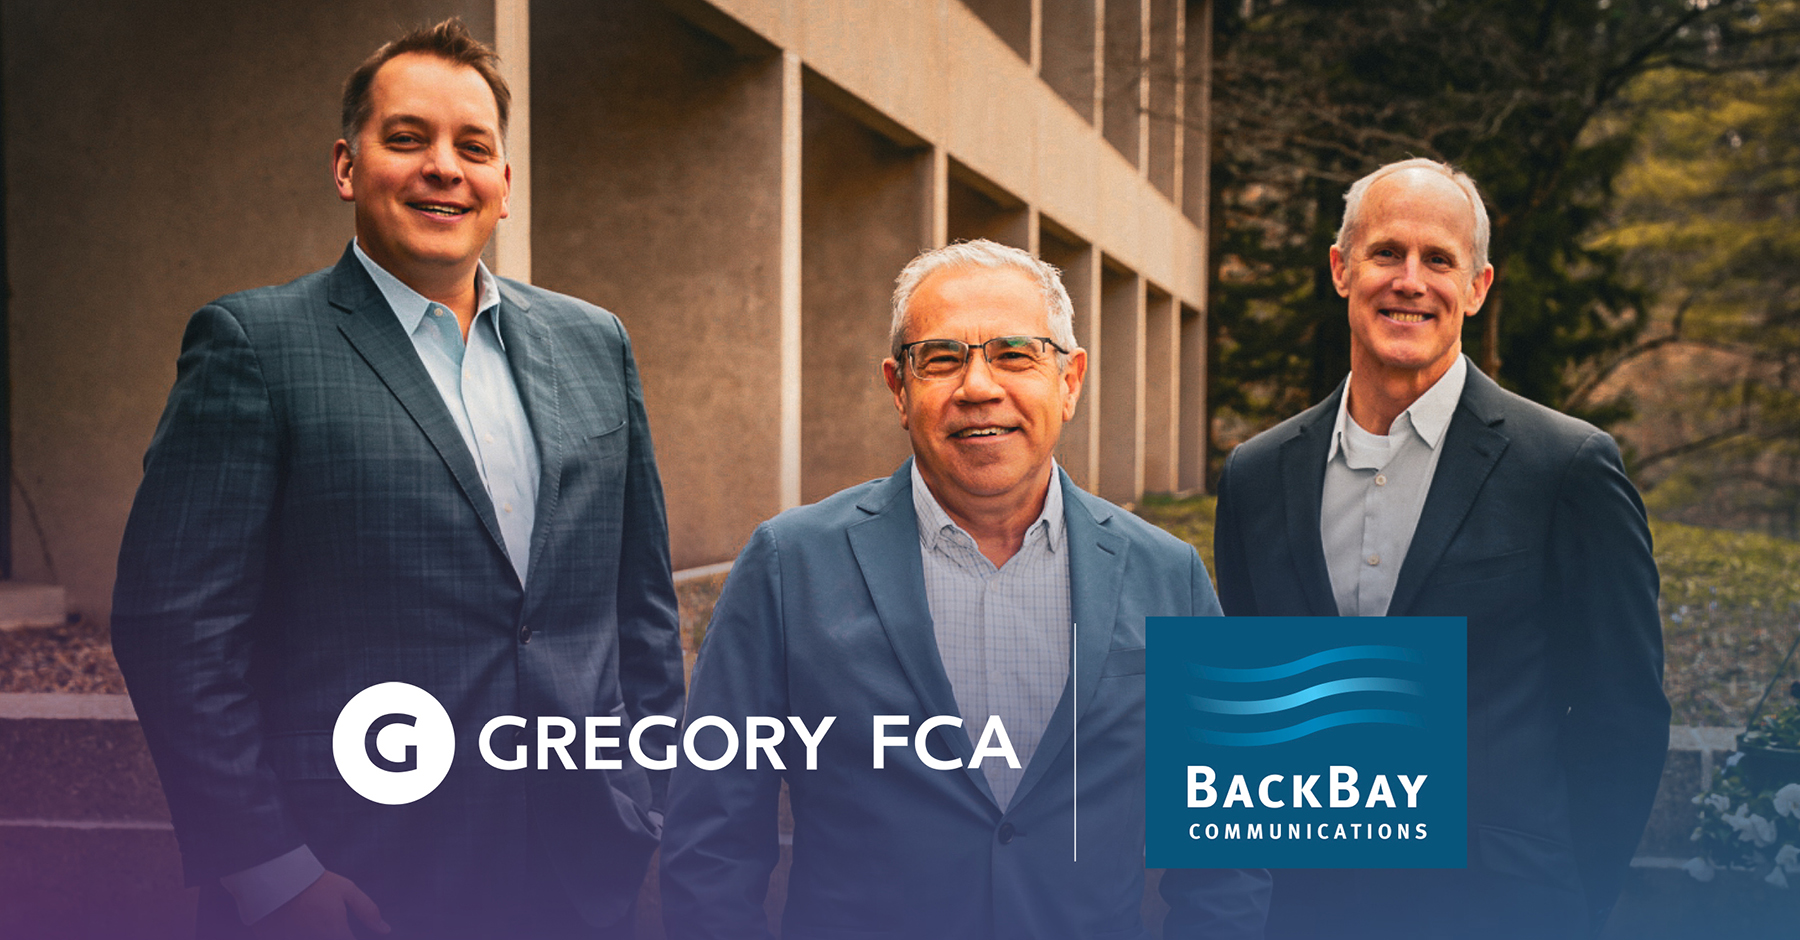 Gregory FCA Acquires BackBay Communications to Forge a Powerhouse in Financial Services Strategic Communications